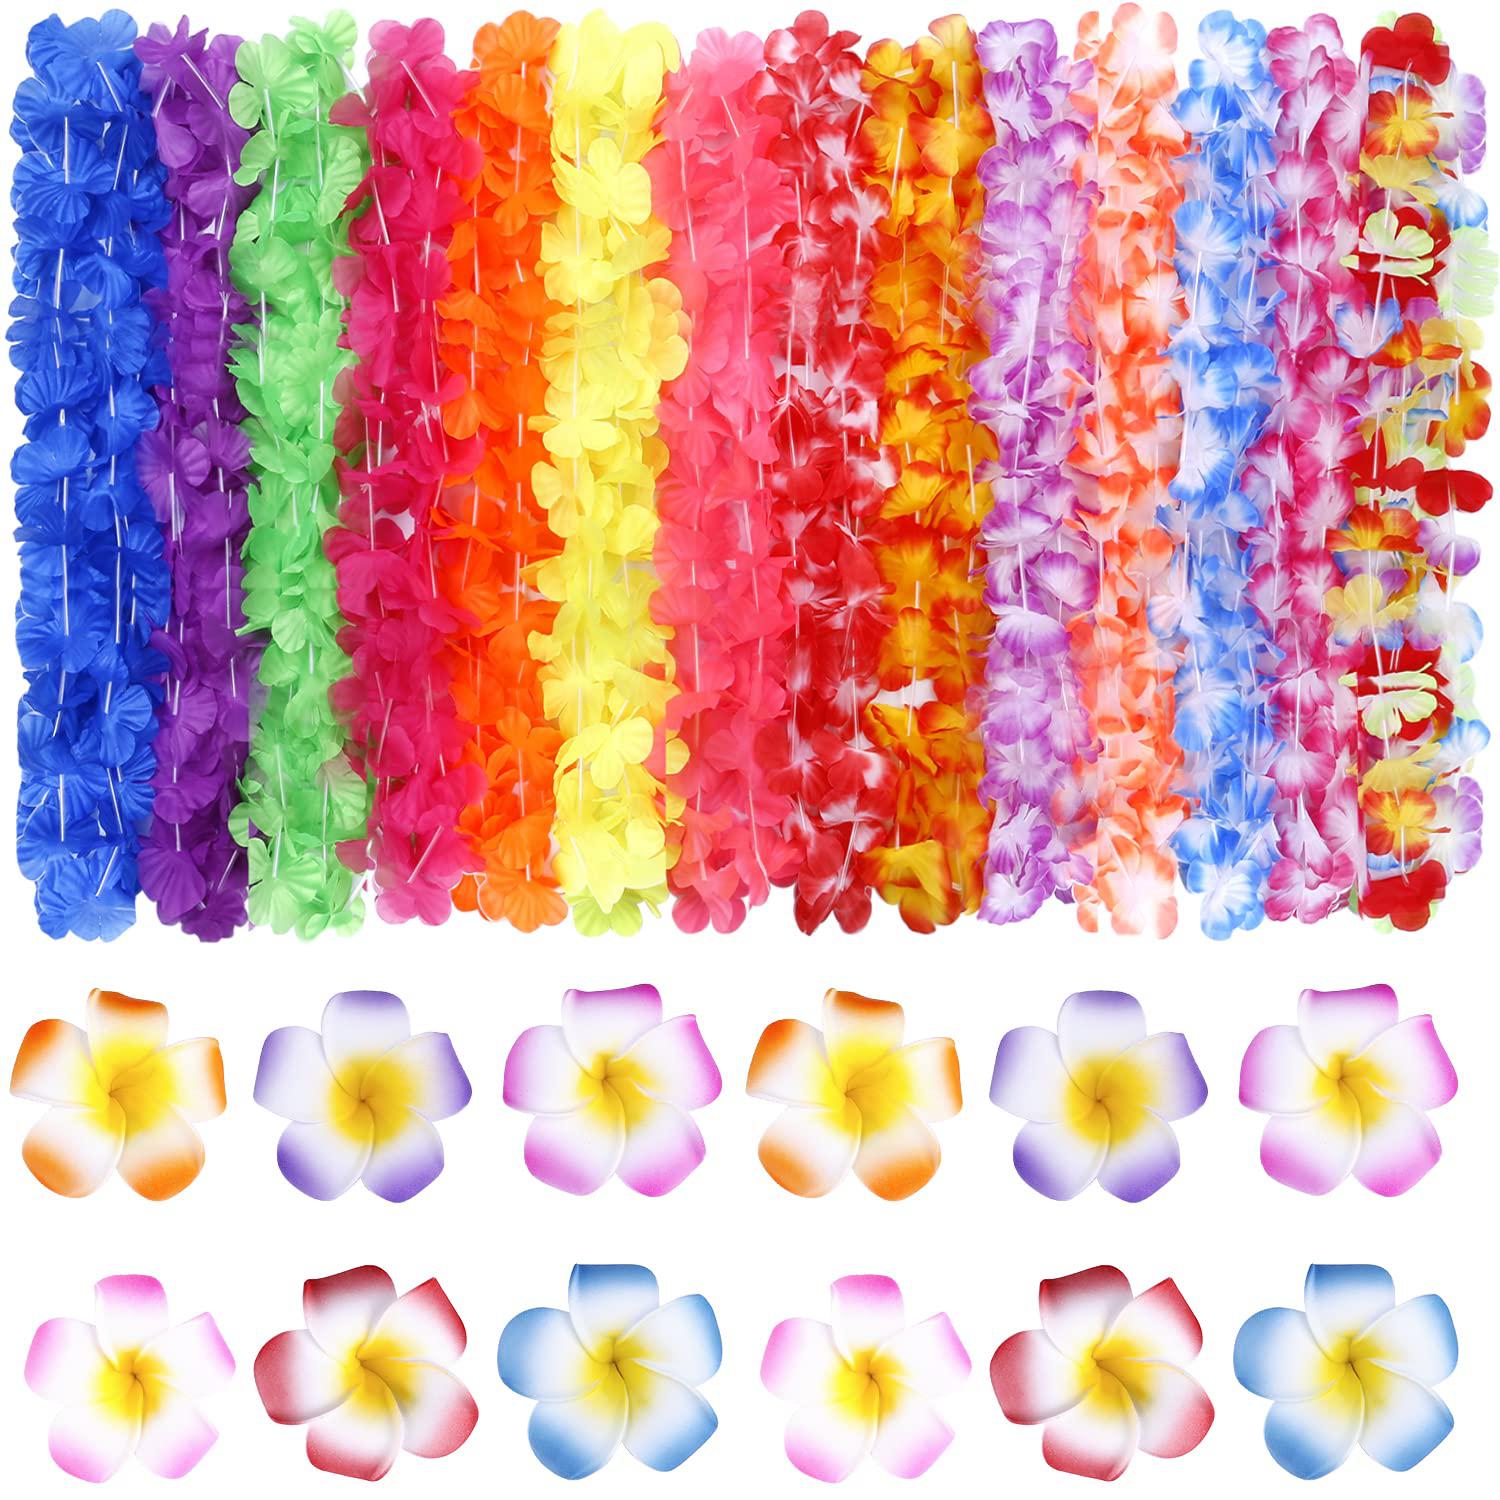 ginmic hawaiian leis, luau party favors supplies, 50pcs tropical hawaiian party necklace with 6 lei hair clips,for kids or ad